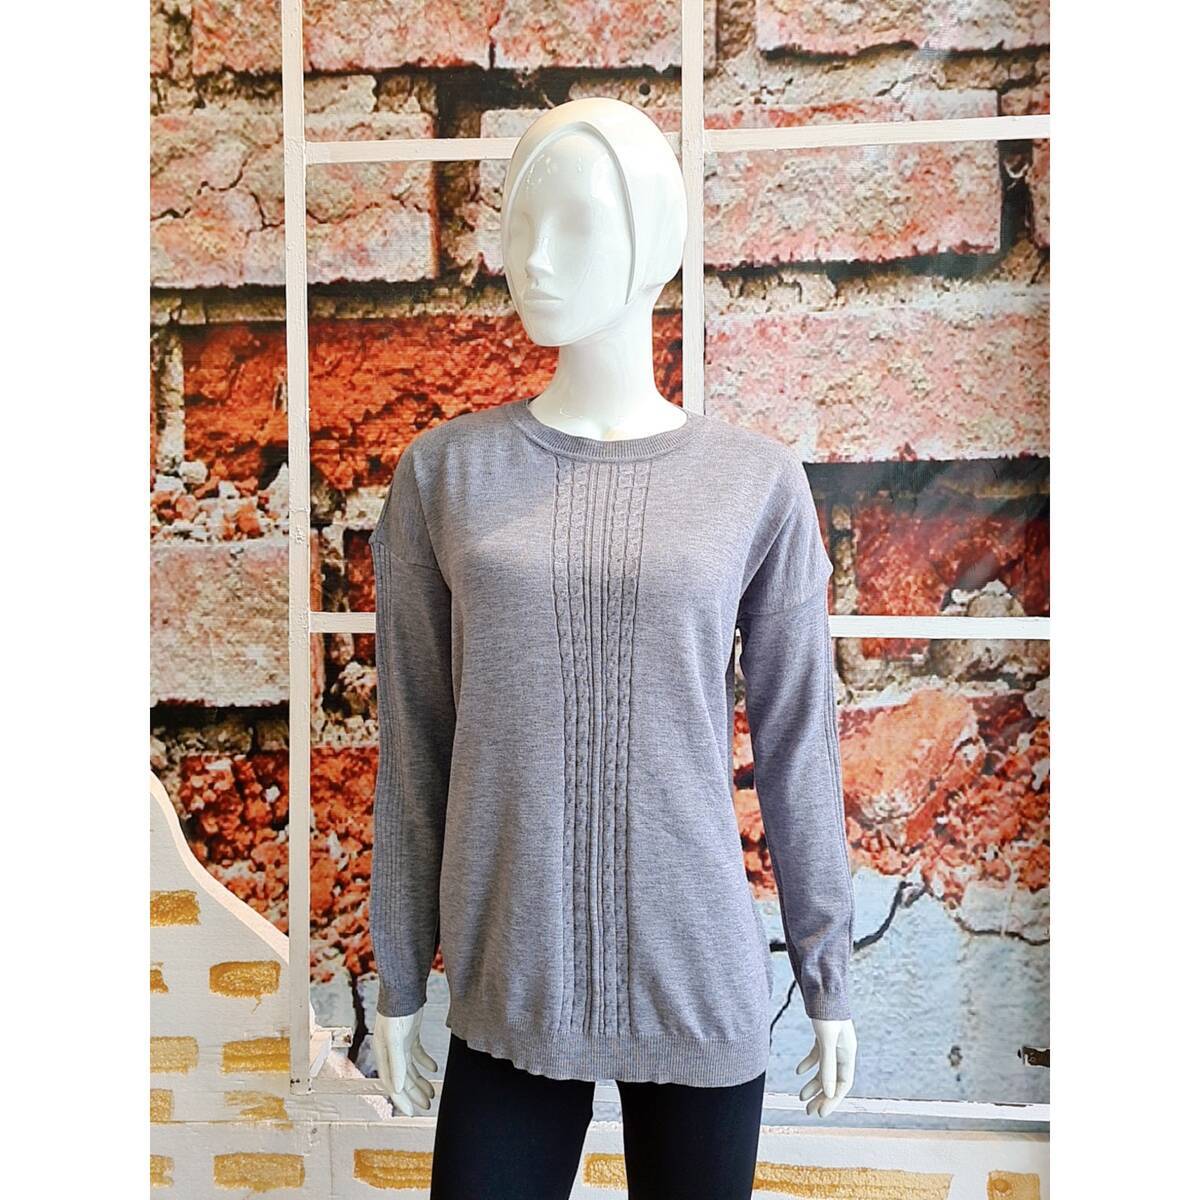 Imagen producto Sweater 11